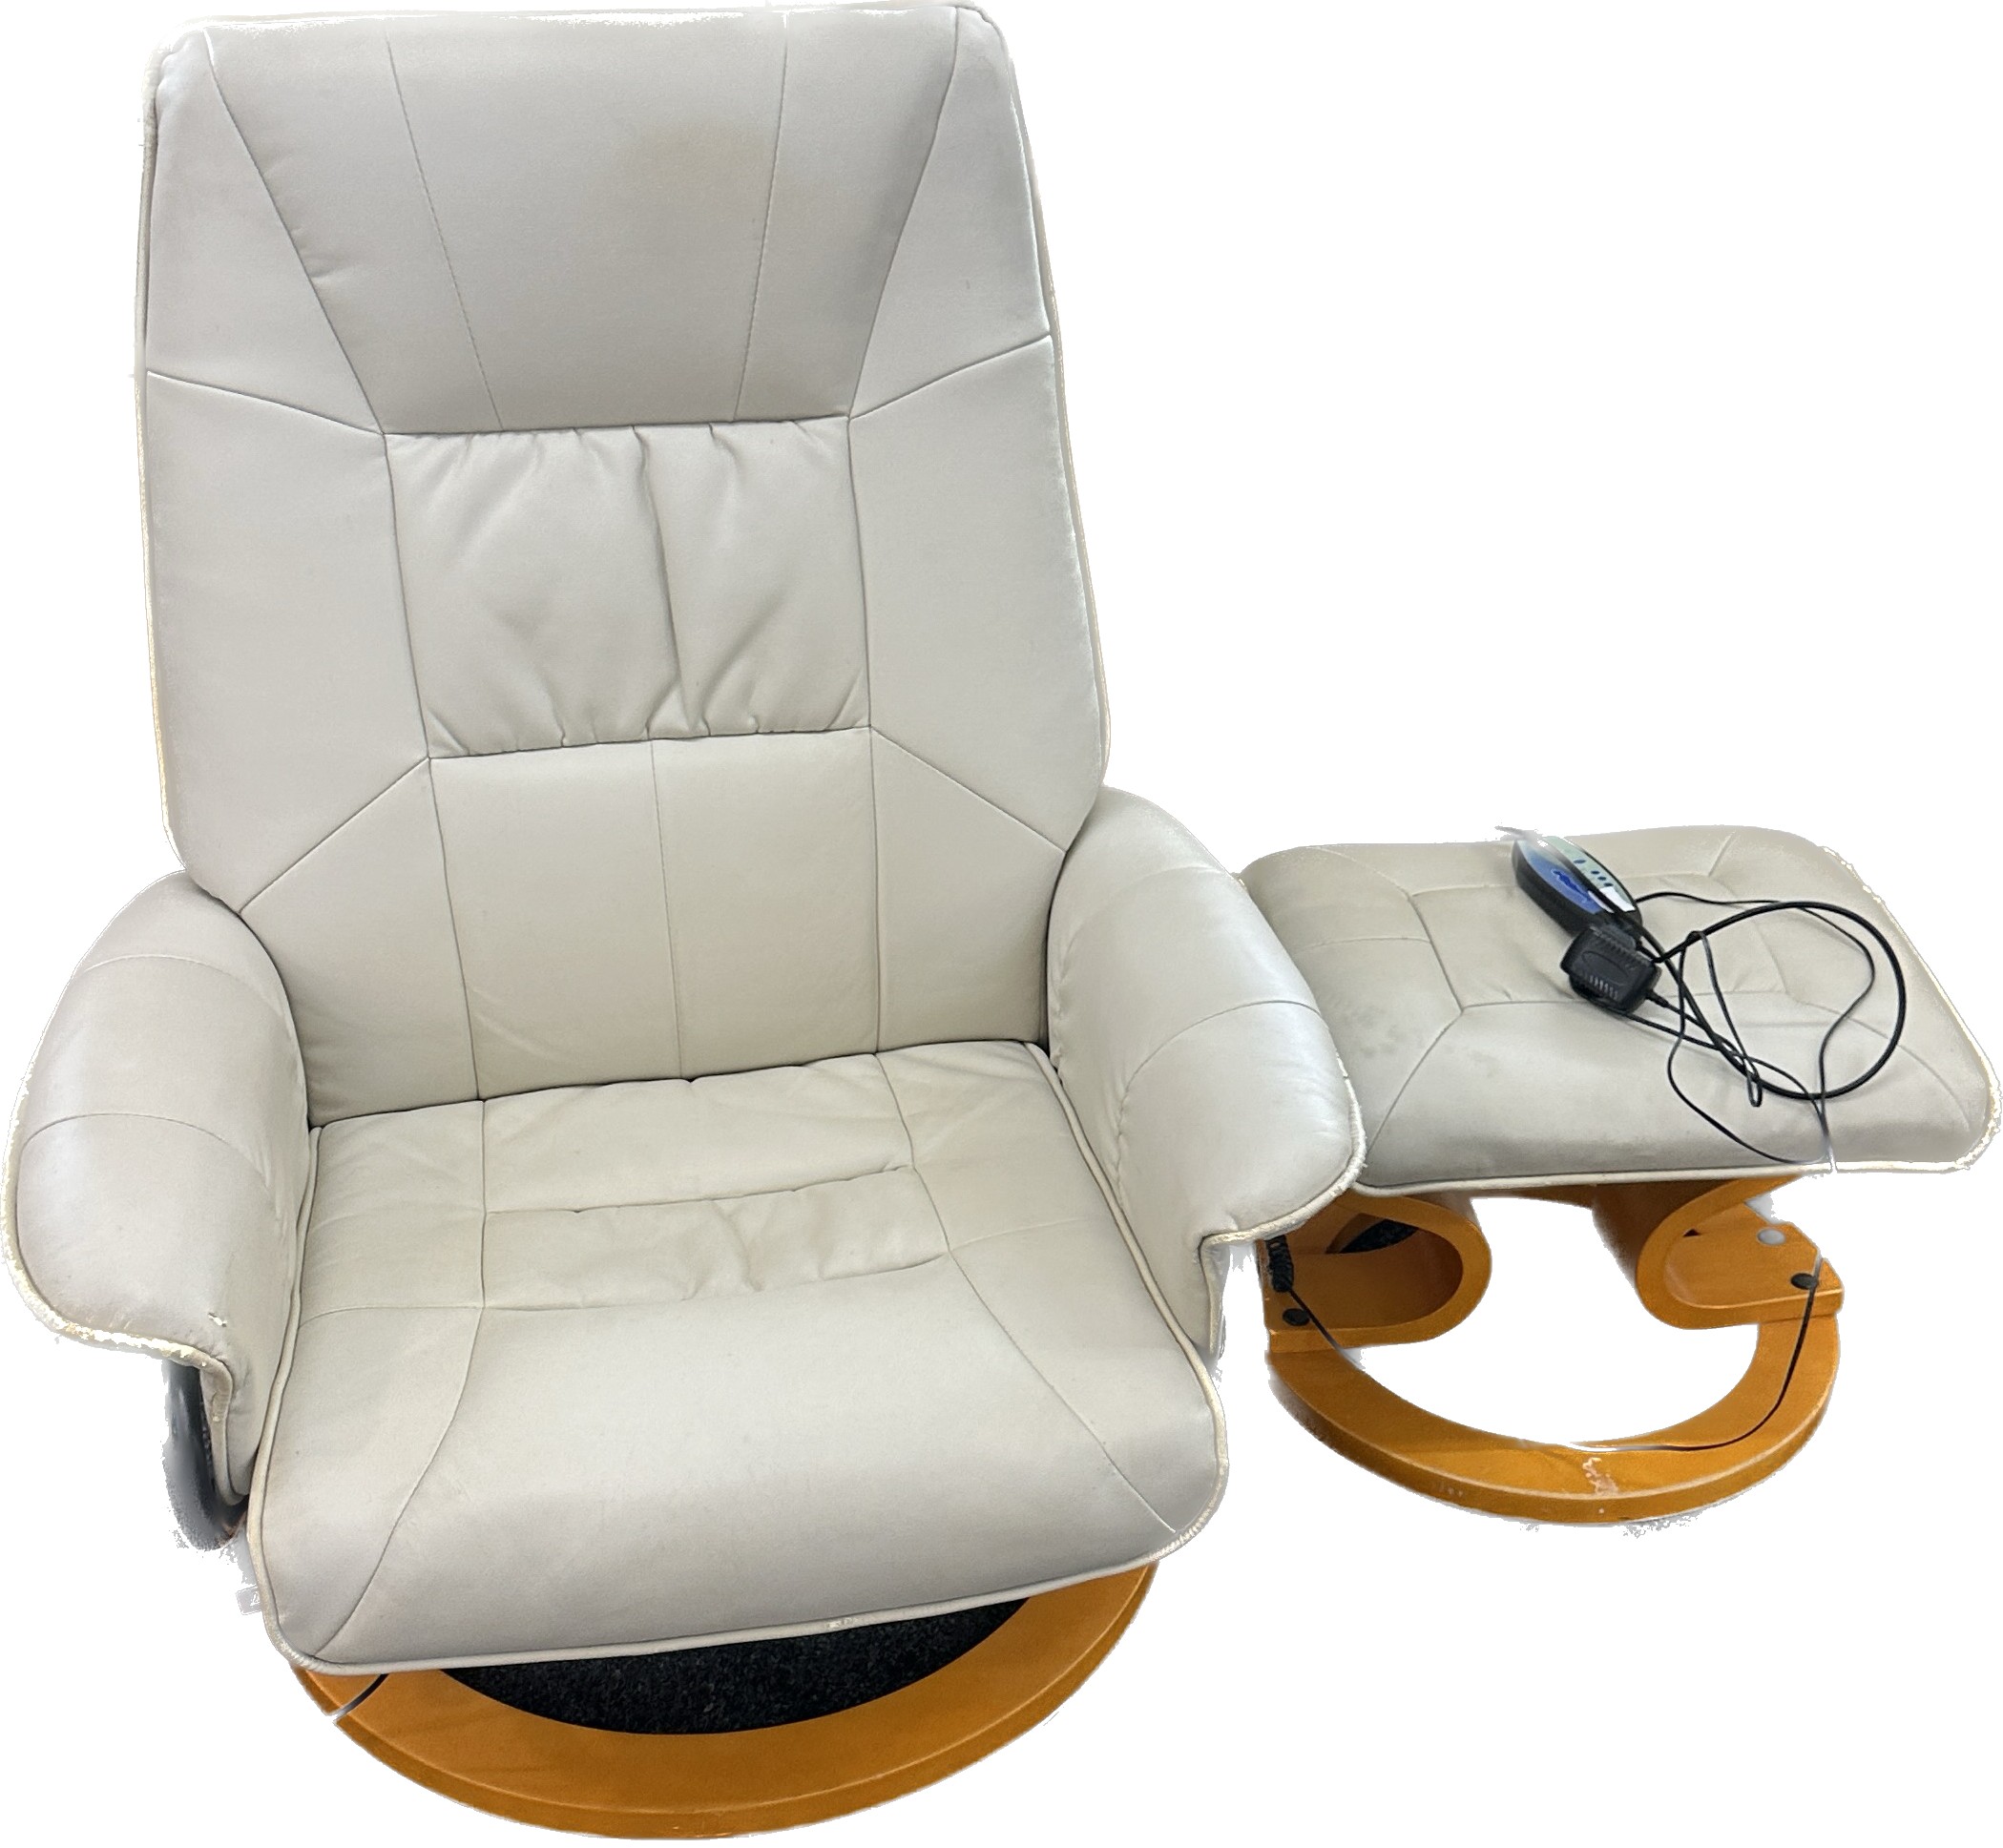 Electric massage chair and stool in working order - Image 2 of 4